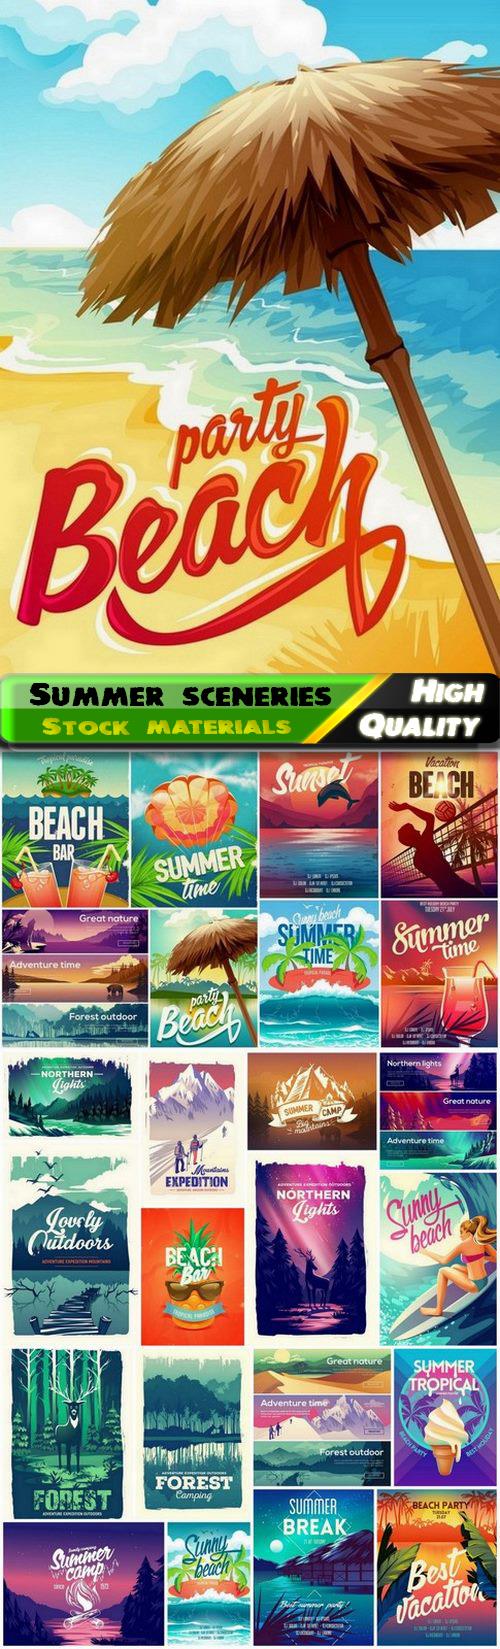 Summer sceneries with mountains beaches forests - 25 Eps